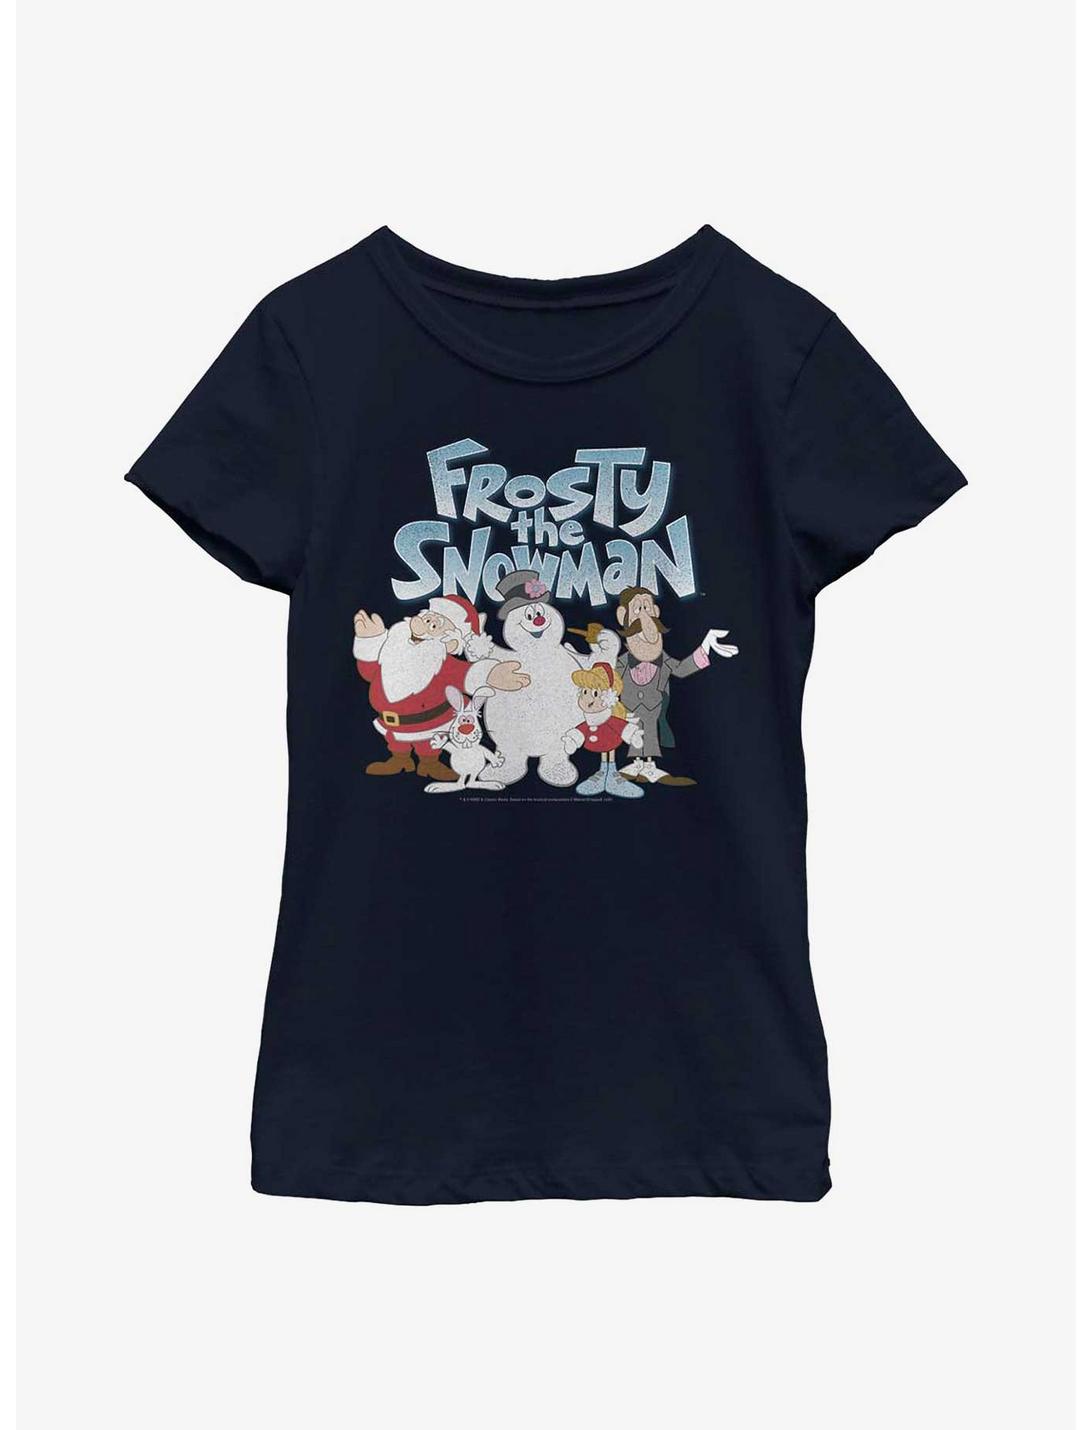 Frosty The Snowman Group Youth Girls T-Shirt, NAVY, hi-res